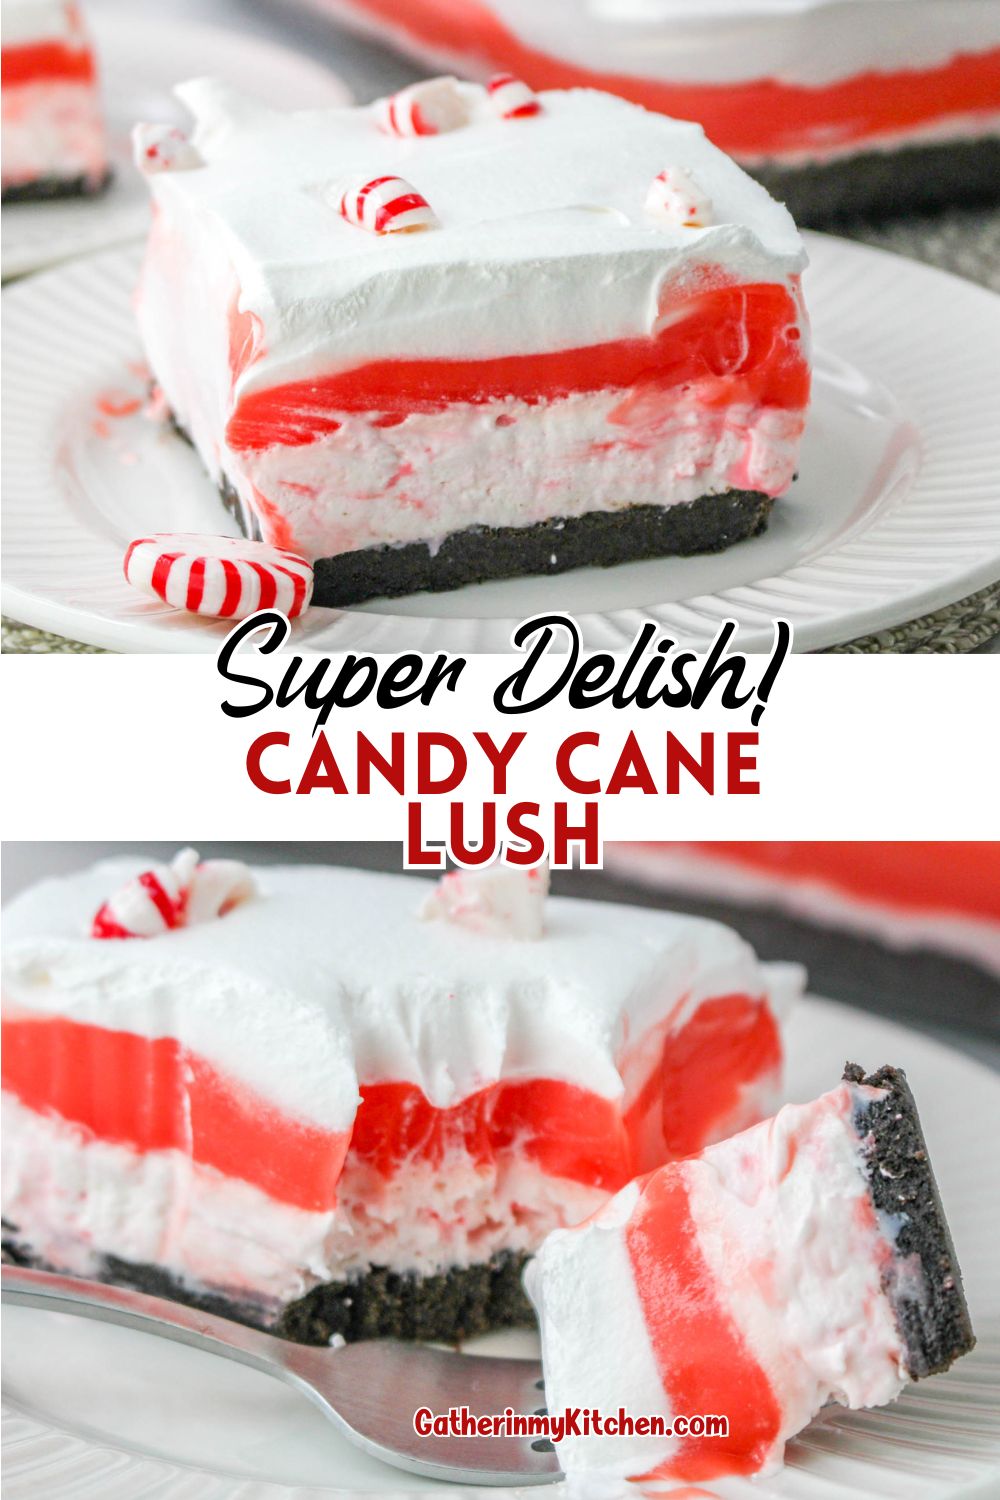 Pin image: top and bottom have pics of candy cane lush and the middle says "Super Delish! Candy Cane Lush".